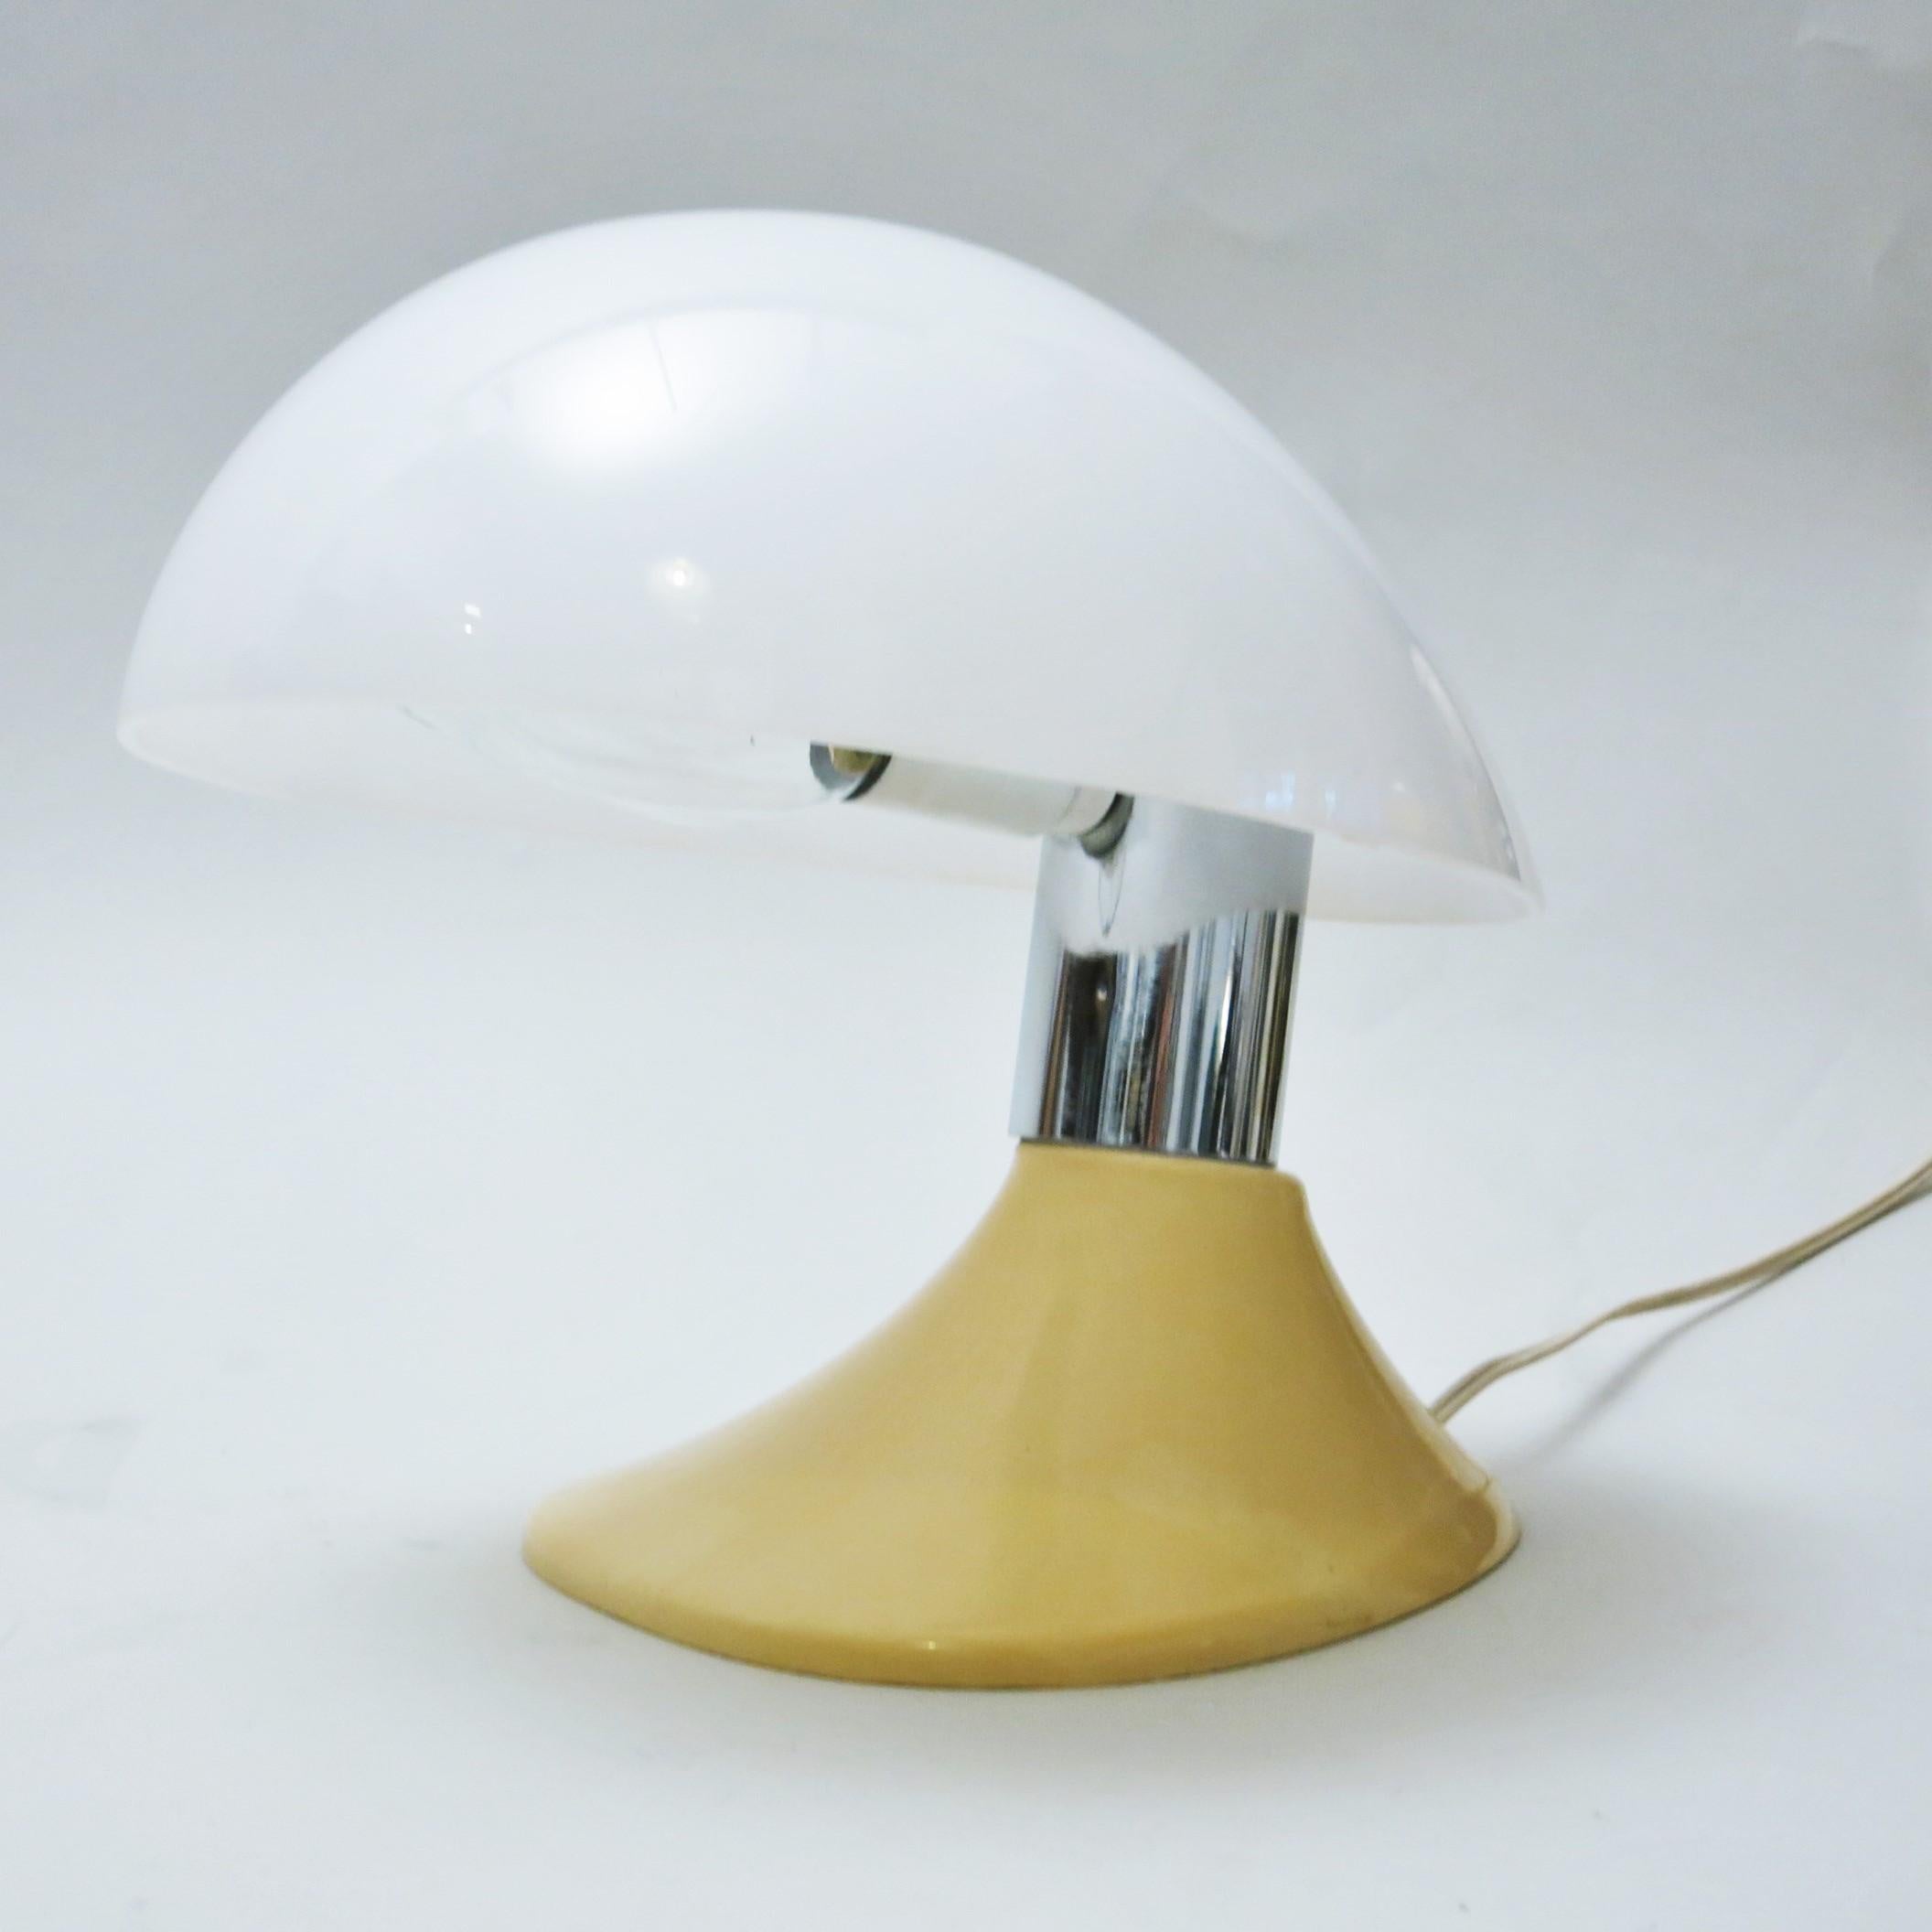 Iconic Italian Space Age lamp with opal acrylic shade, ABS palstic base and arm in chromed metal from the 1960s